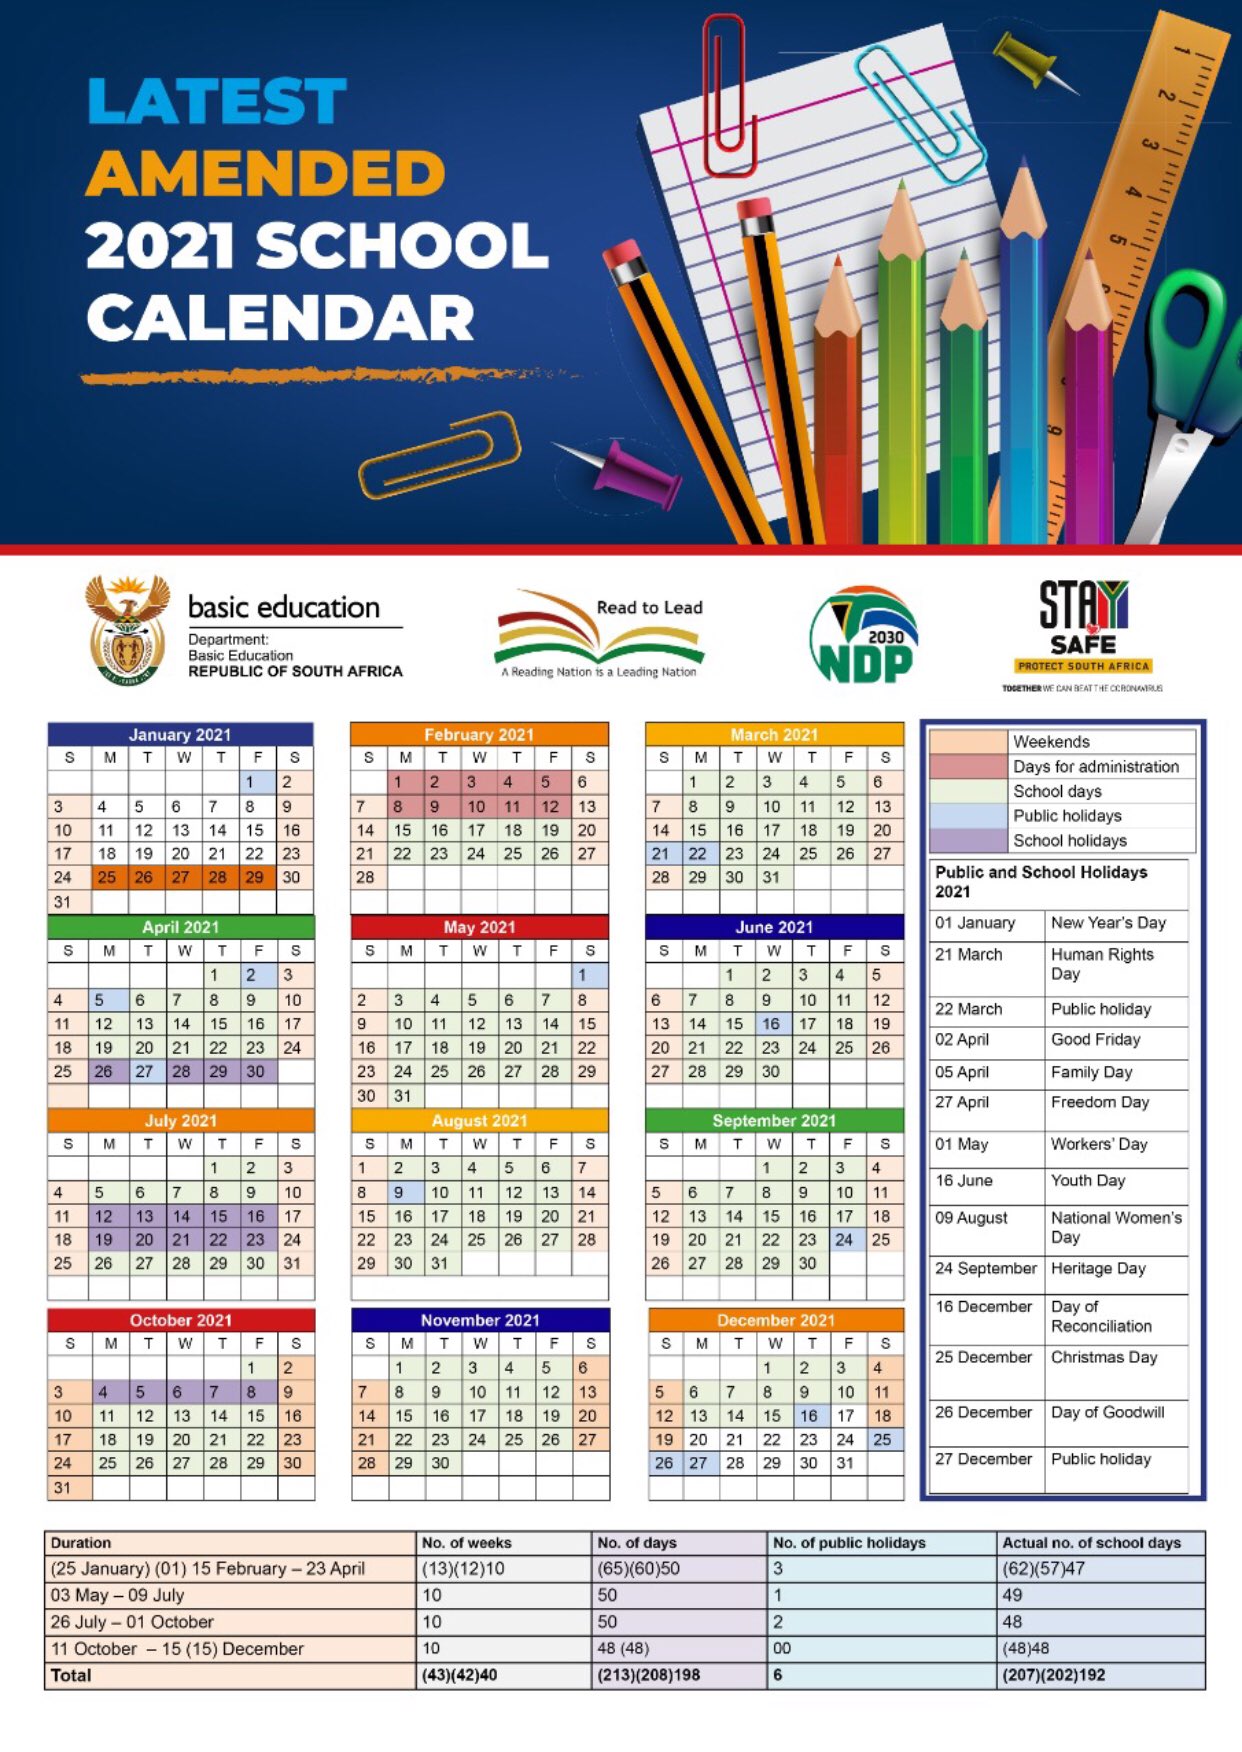 South Africa’s amended school calendar for 2021 released | News